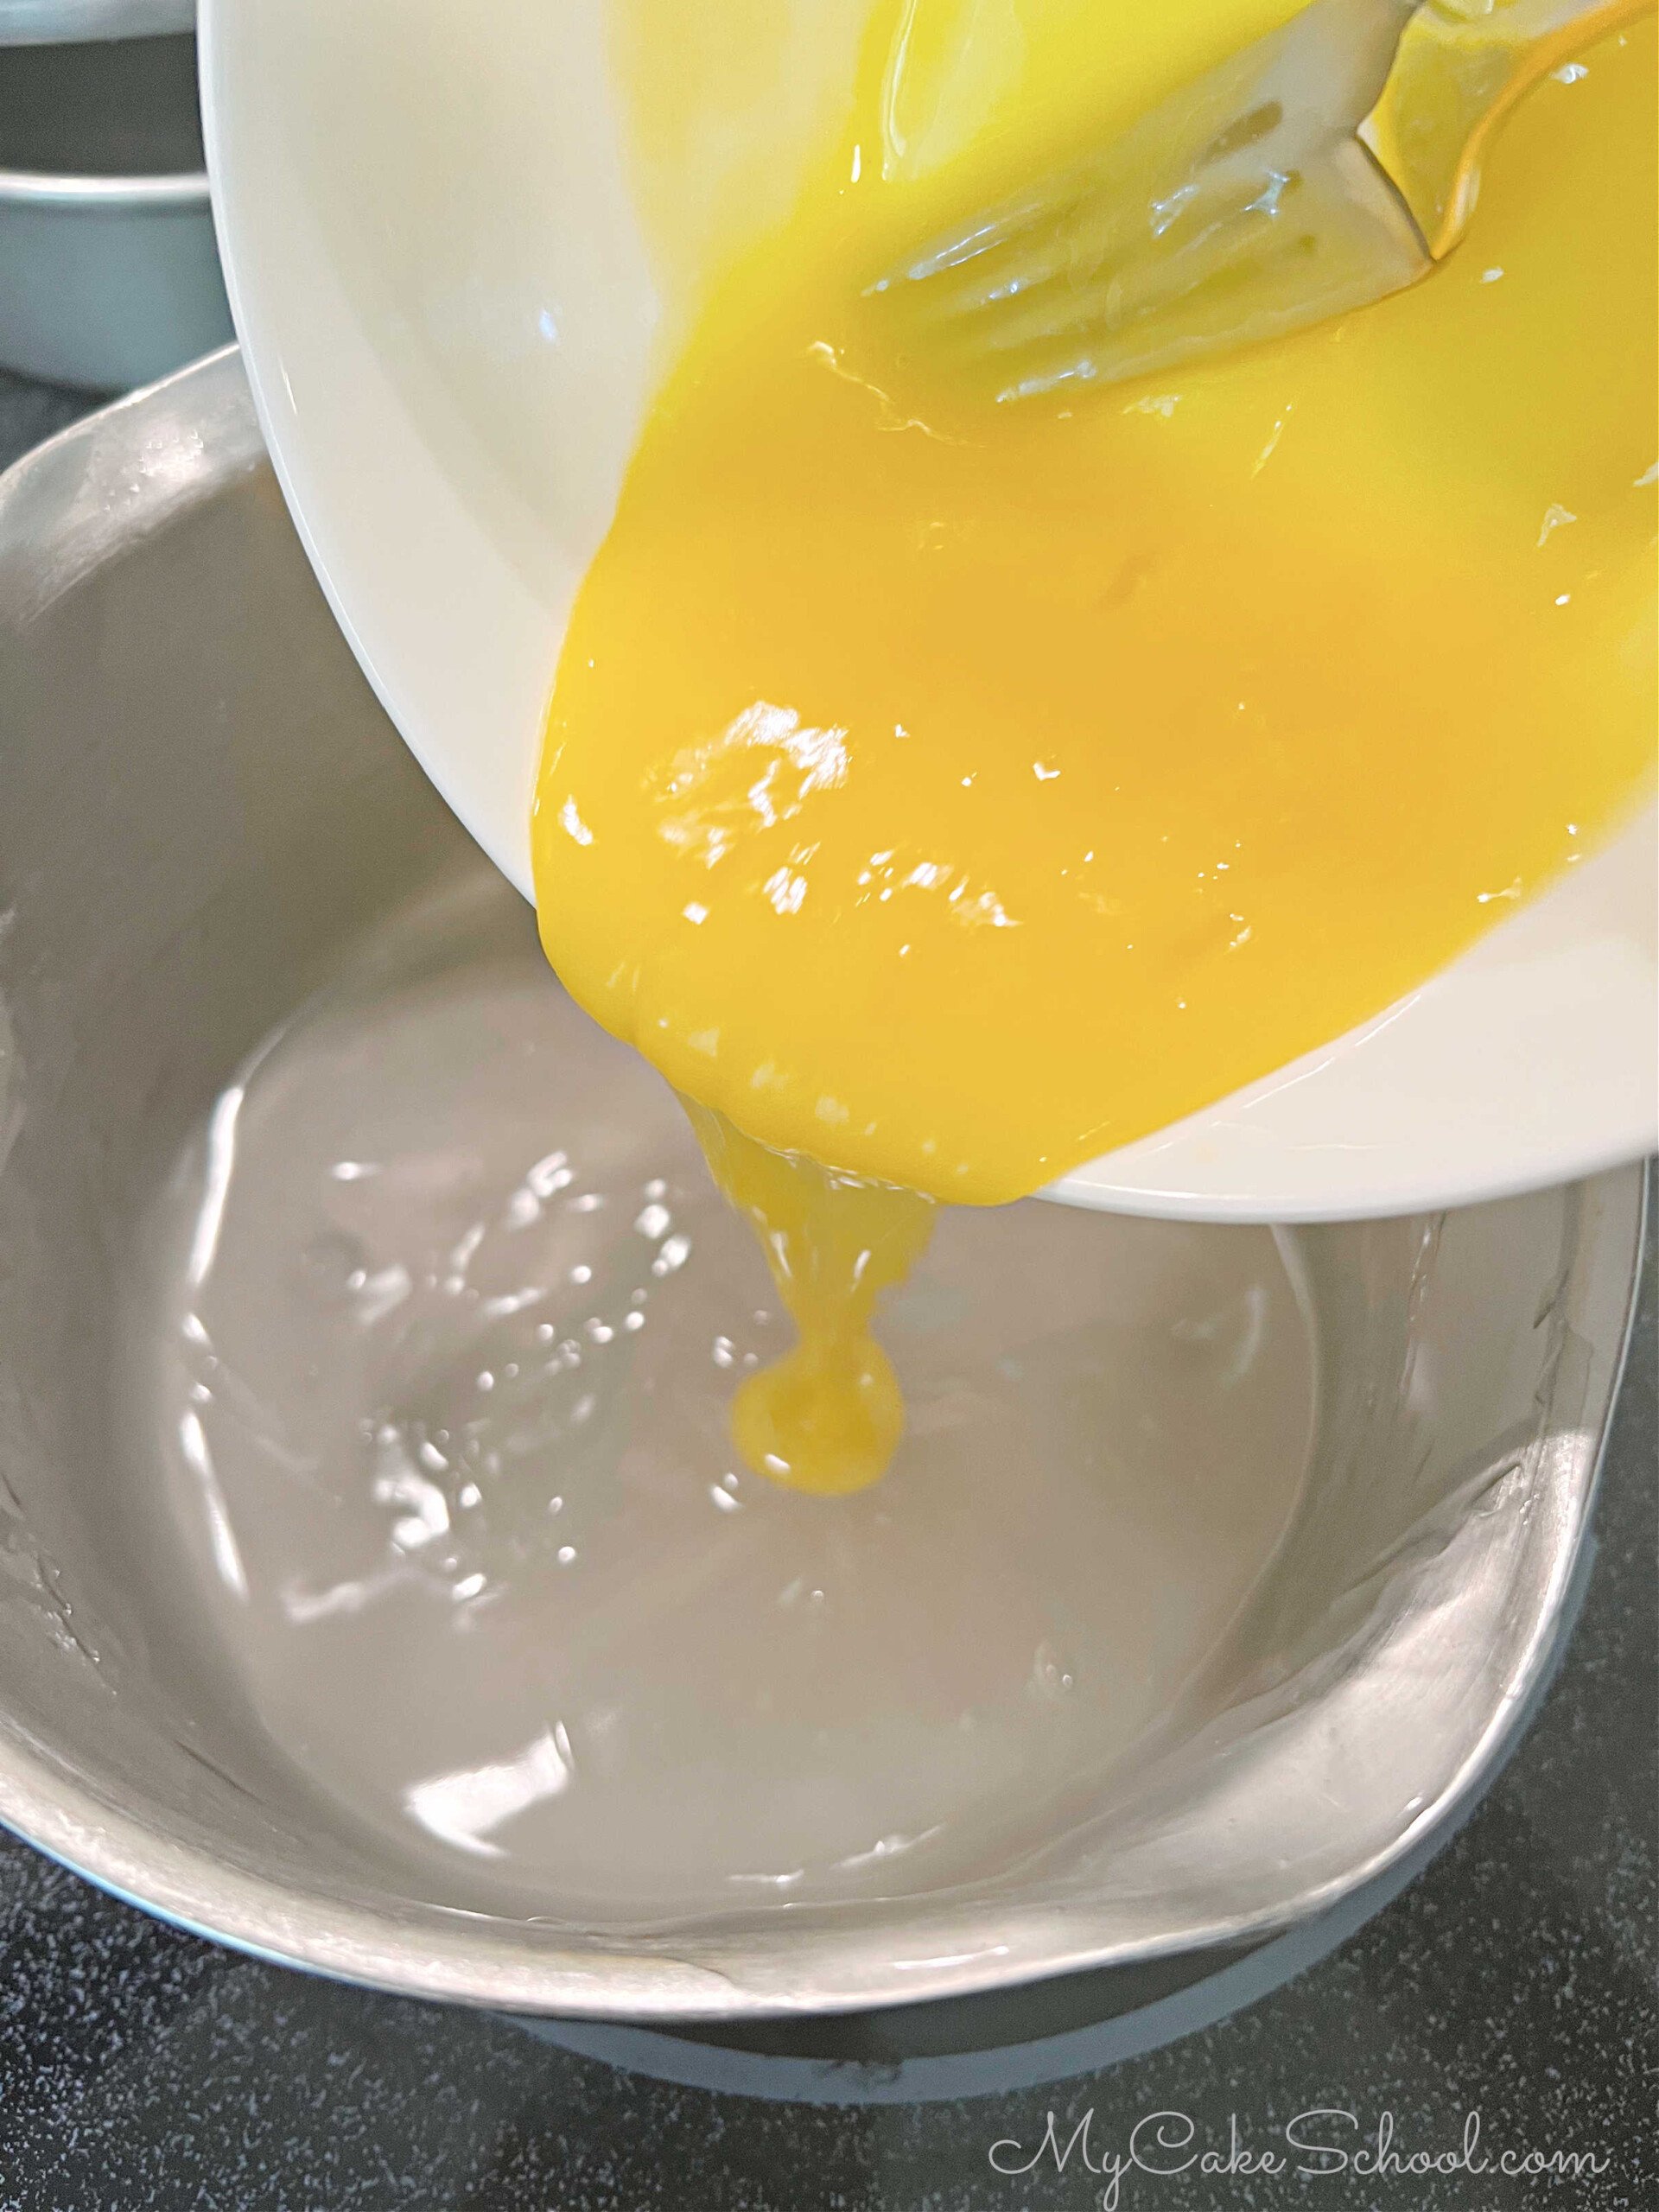 Pouring egg mixture into cornstarch, sugar, and water mixture.